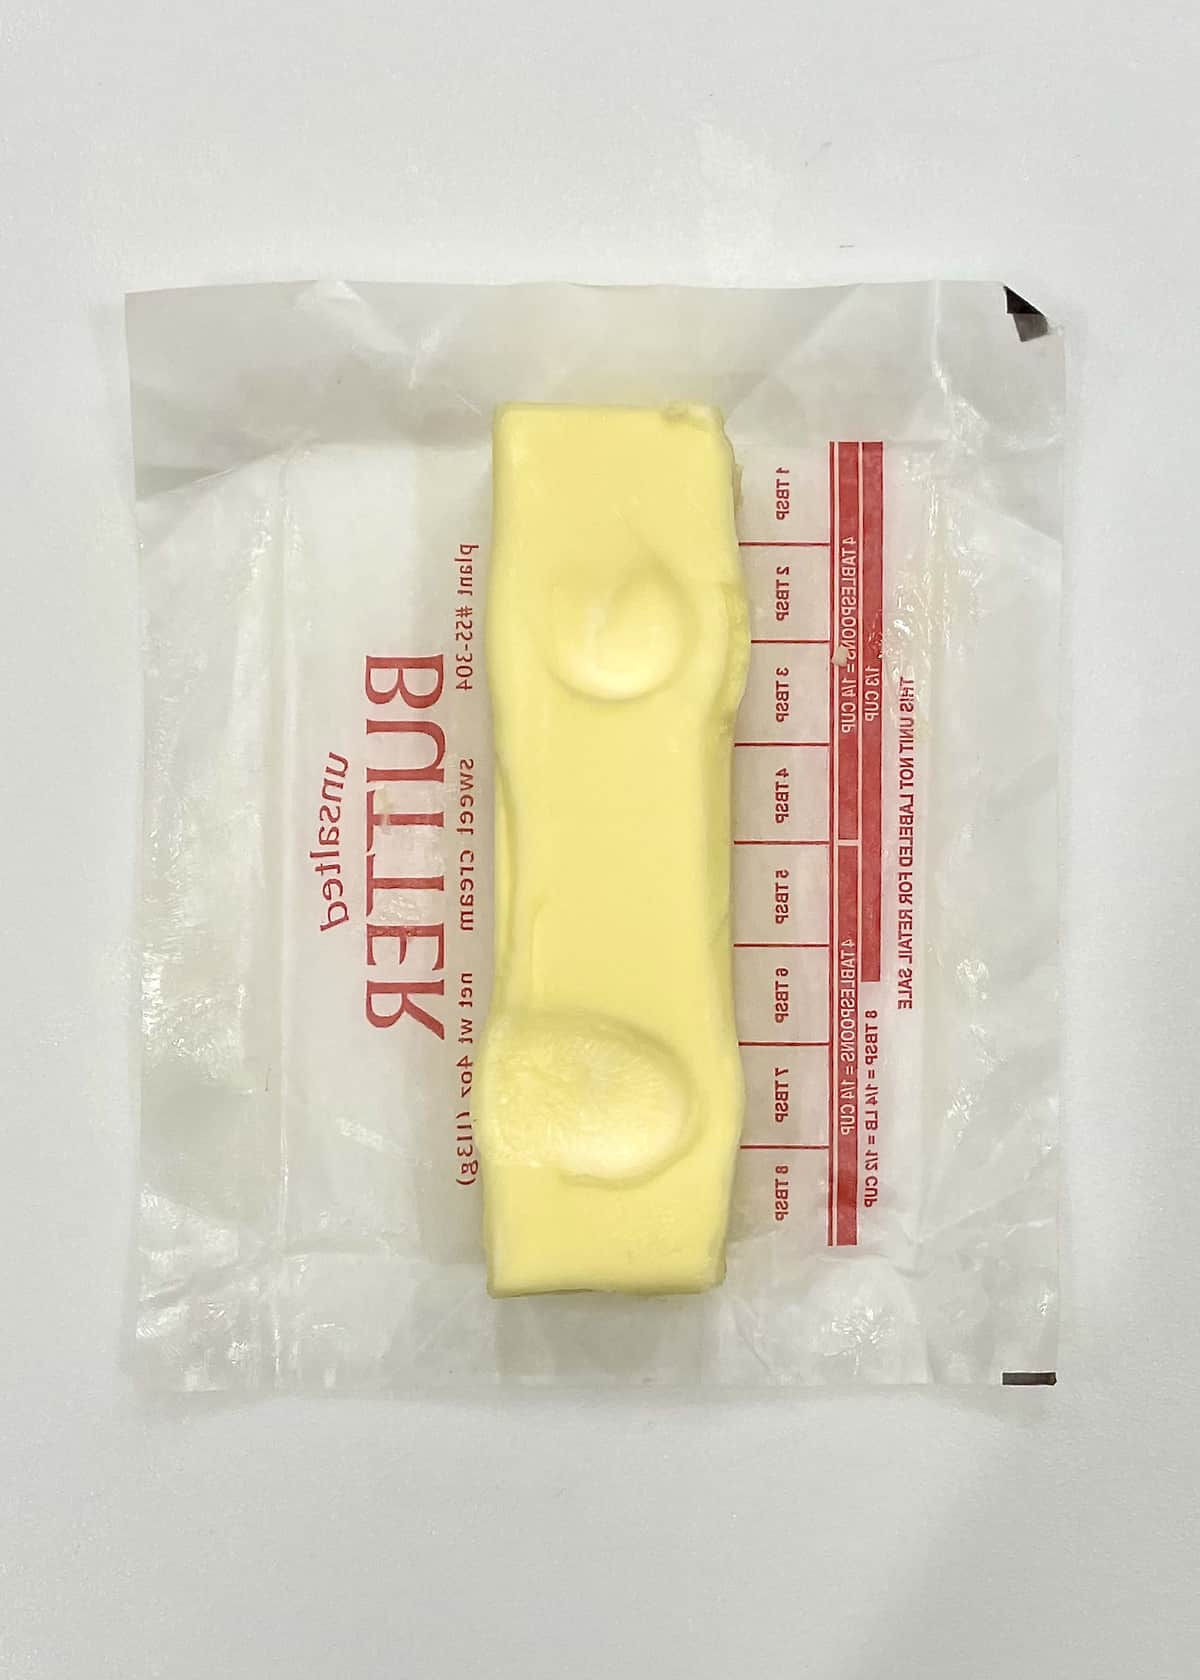 How to Soften Butter by The BakerMama